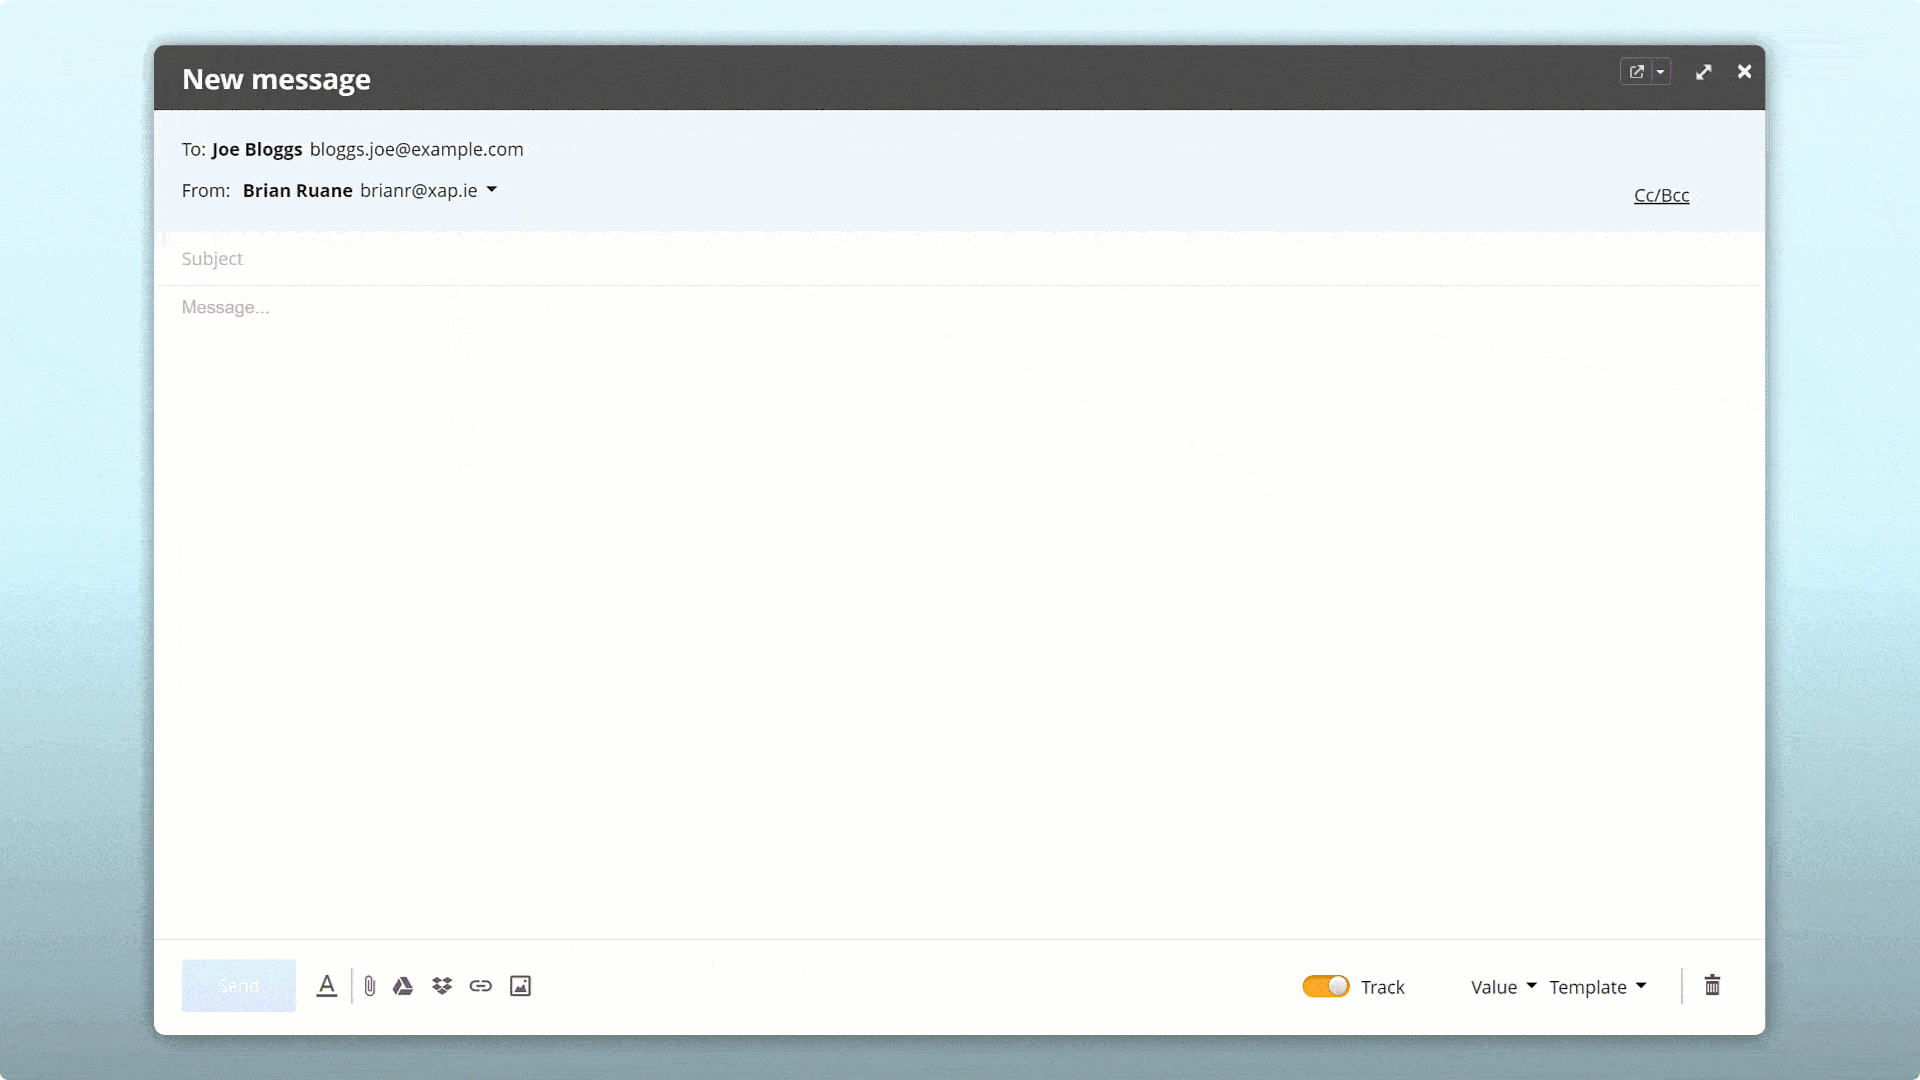 You can attach a template while composing an email in OnePageCRM